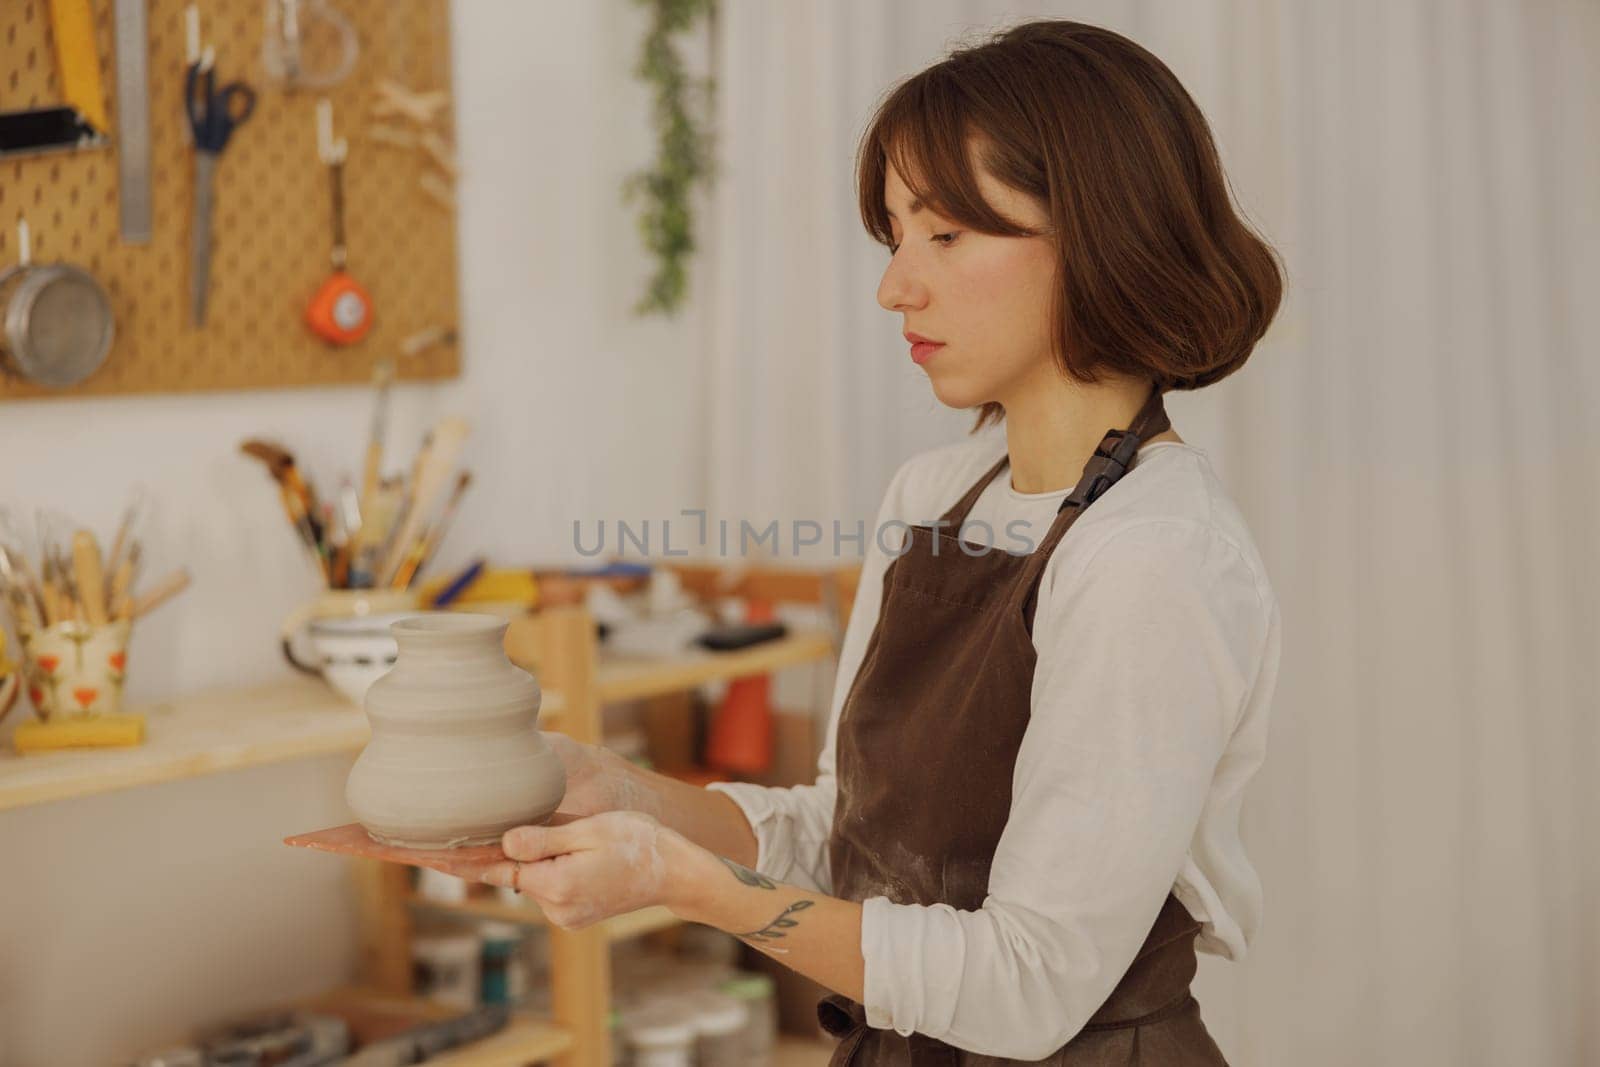 Professional potter wearing apron holding unfired clay vase while standing in pottery studio